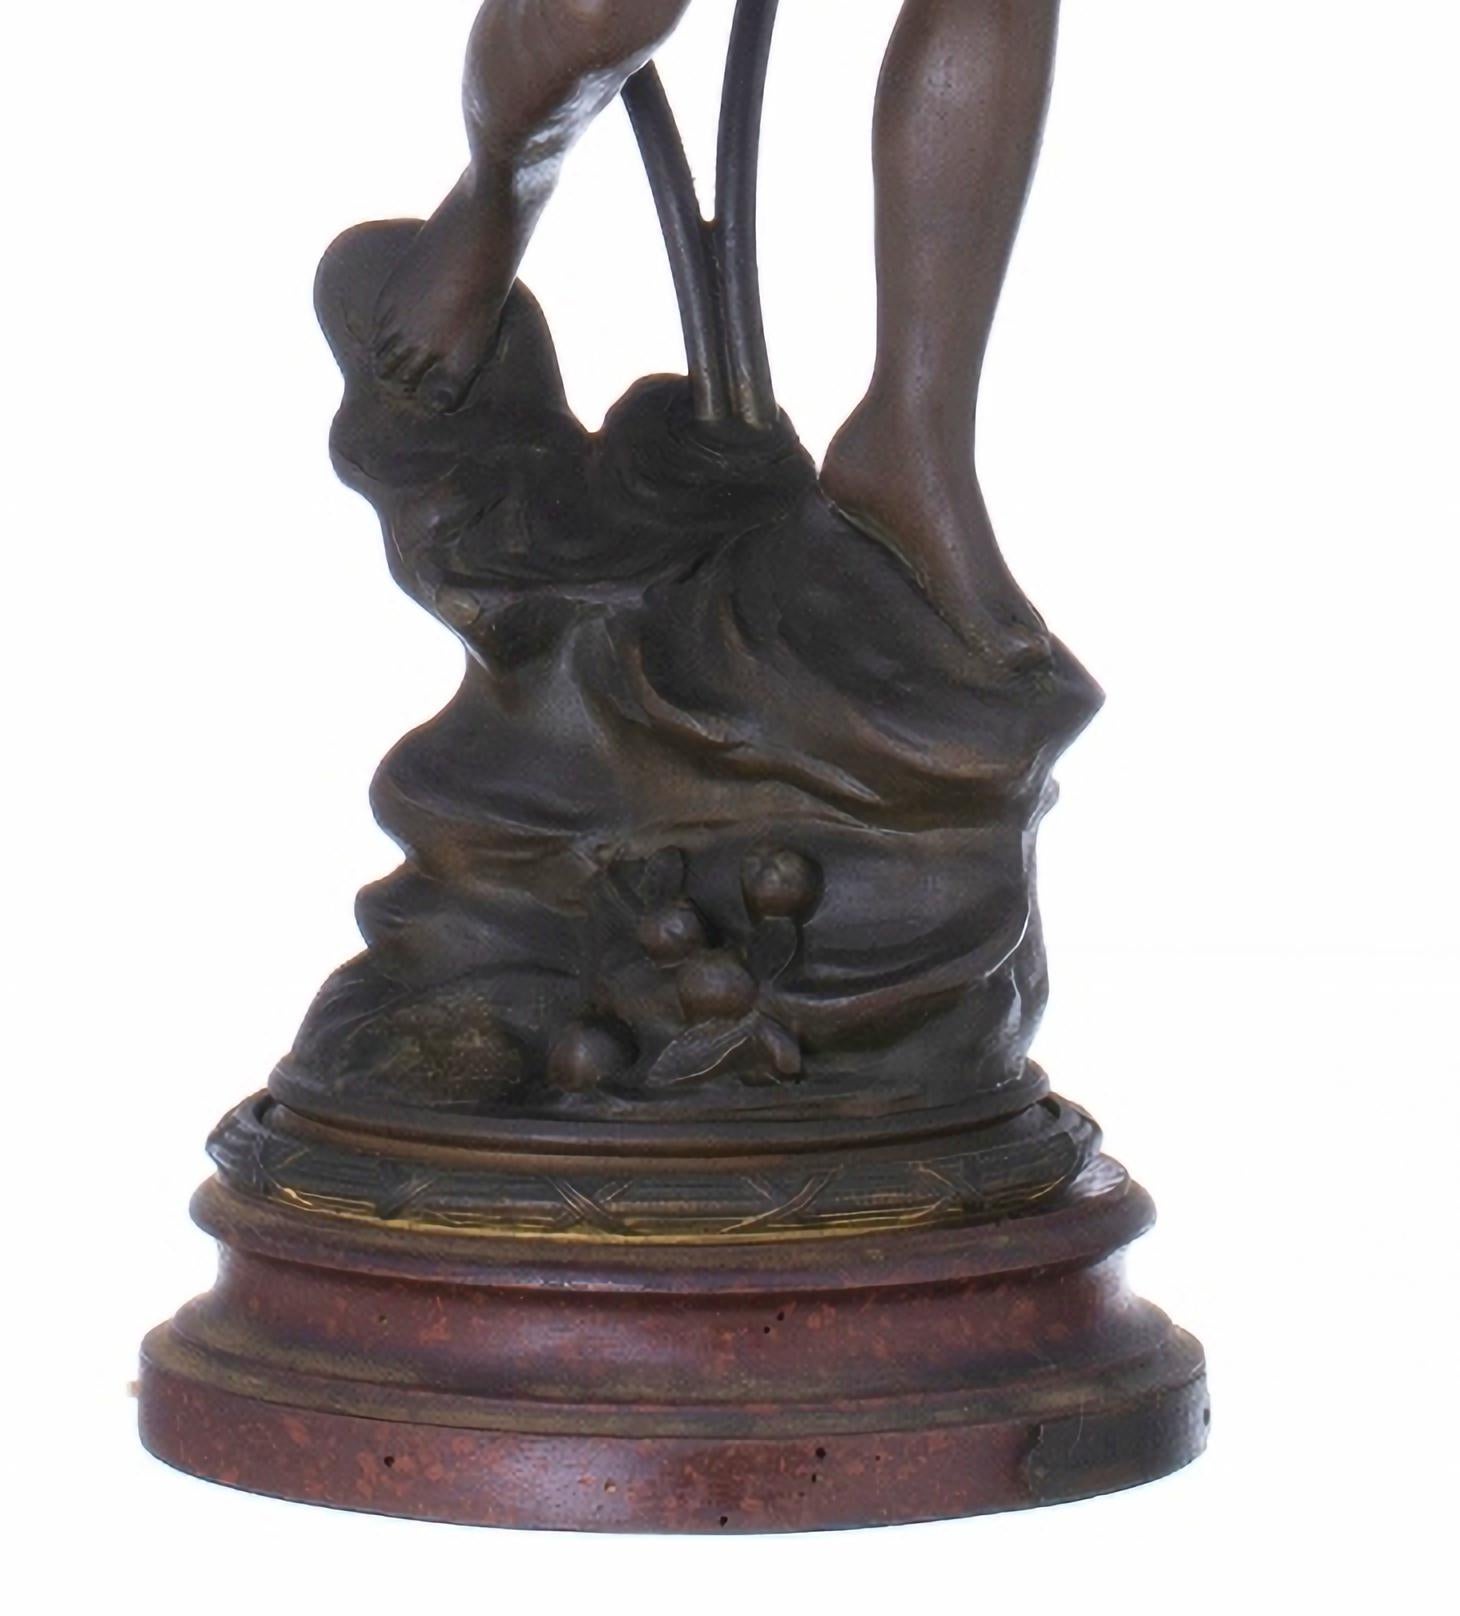 Emile François Rousseau (1853-?)

Art bronze two-light table lamp with two glass tulips.
Mounted on a wooden base.
Signed.
small defects
Measure: height: (total) 78 cm.
Good conditions.